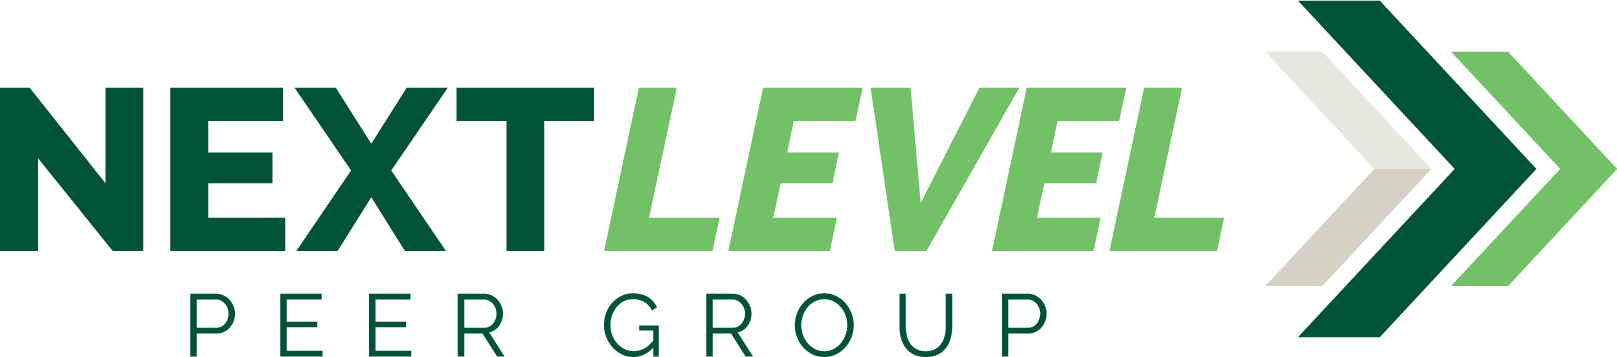 Next Level Peer Group logo, in shades of green and tan with a three-tiered arrow icon on the right